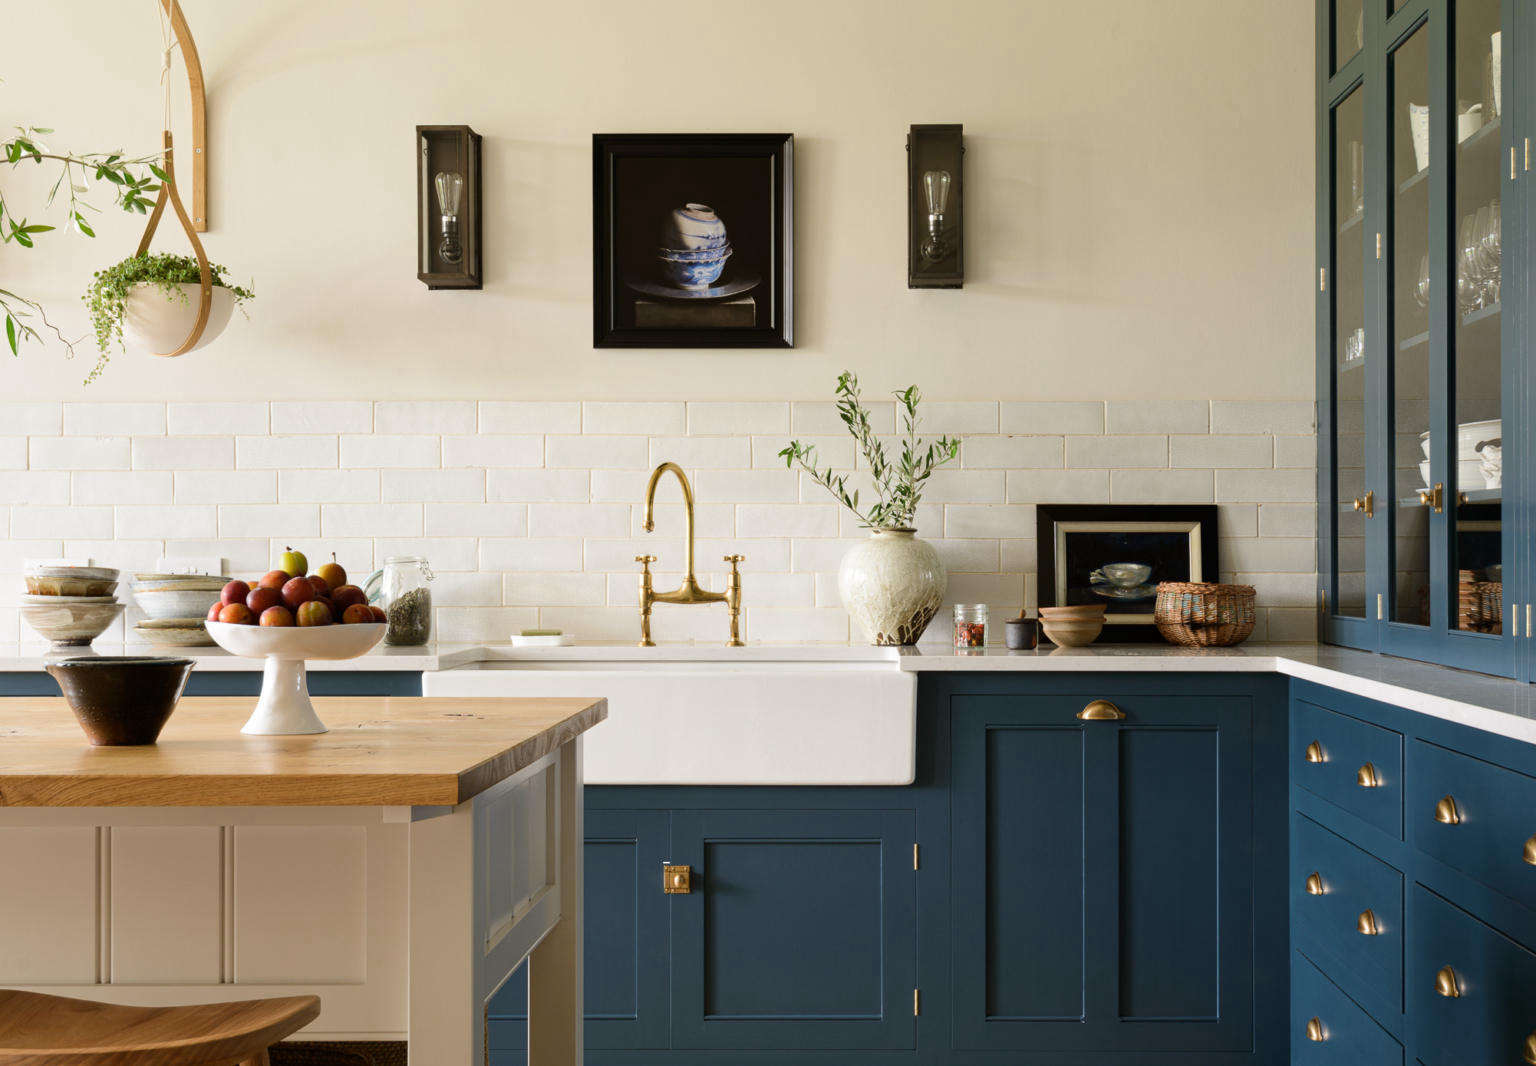 Kitchen of the Week An Imposing English Manor Updated for Modern Family Life portrait 3